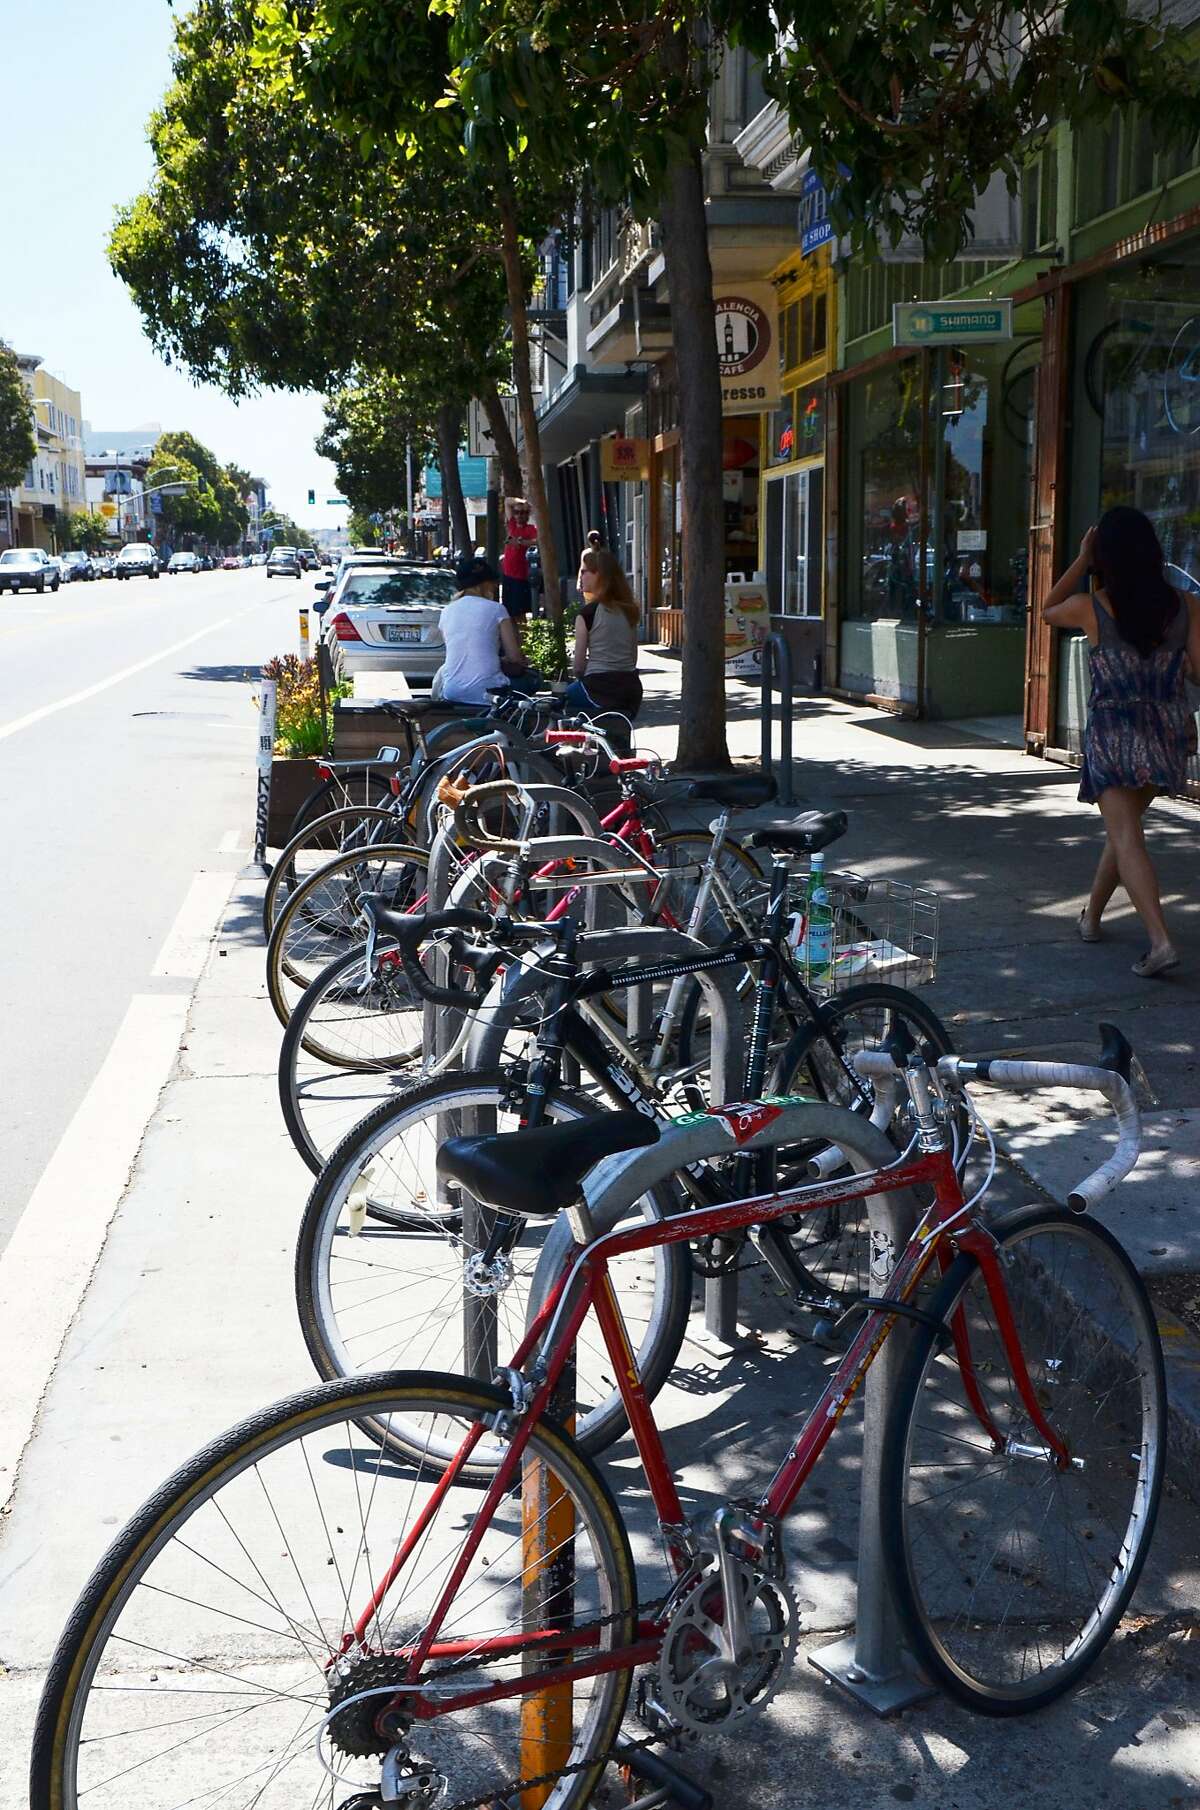 An on-street bike corral on Valencia Street comfortably holds 12 bikes and keeps the sidewalks clear for pedestrians. Requesting bike racks or bike corrals are two ways San Francisco bicyclists can directly improve their commute.